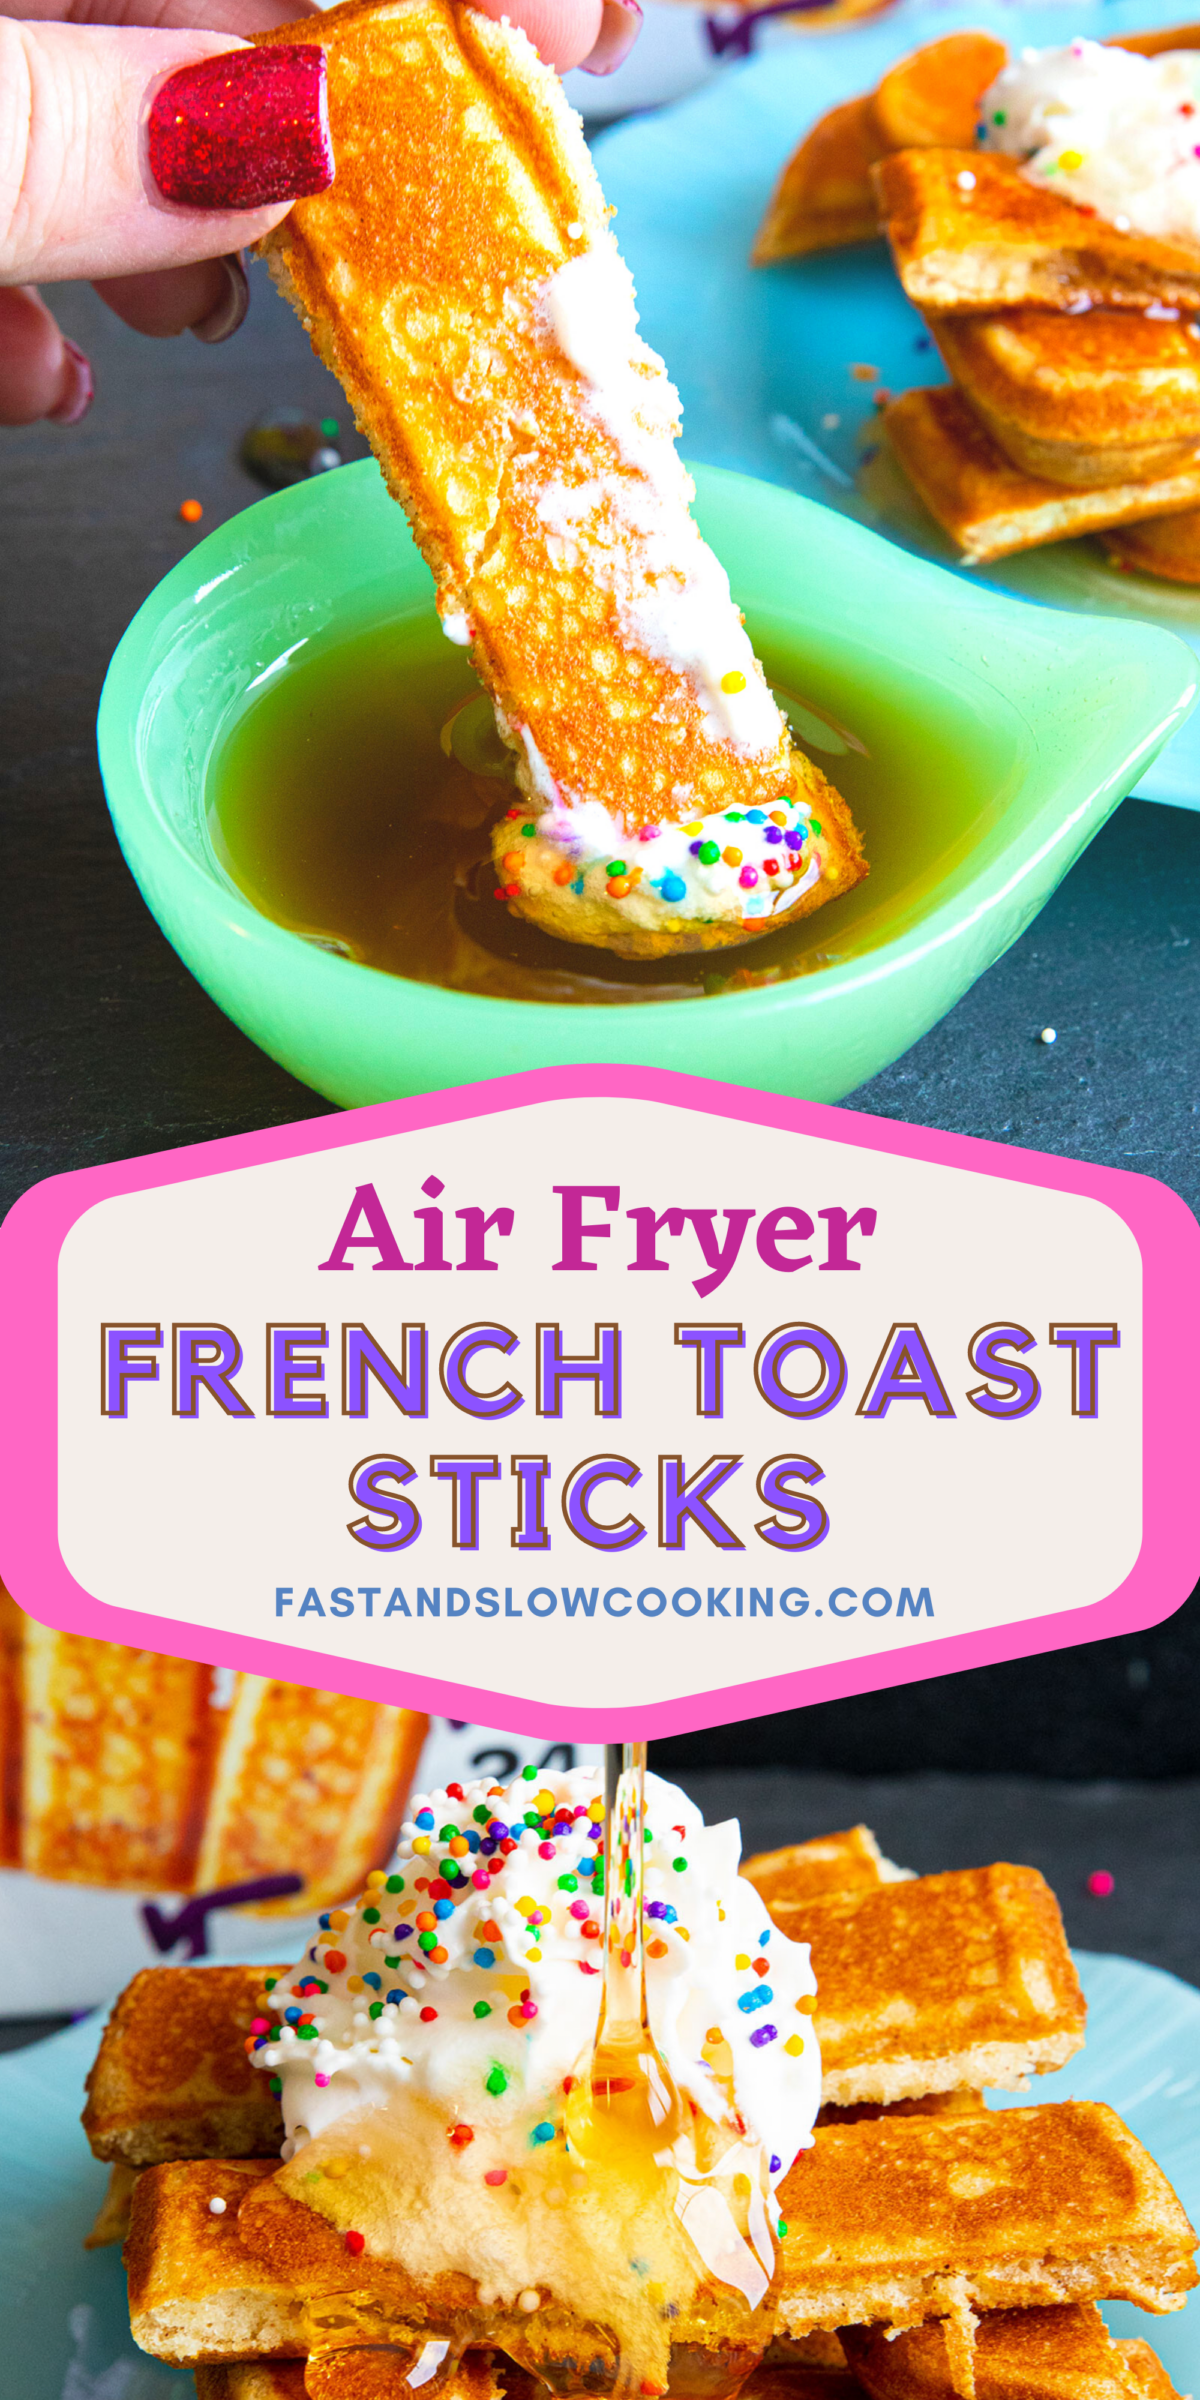 French toast sticks dipped in syrup